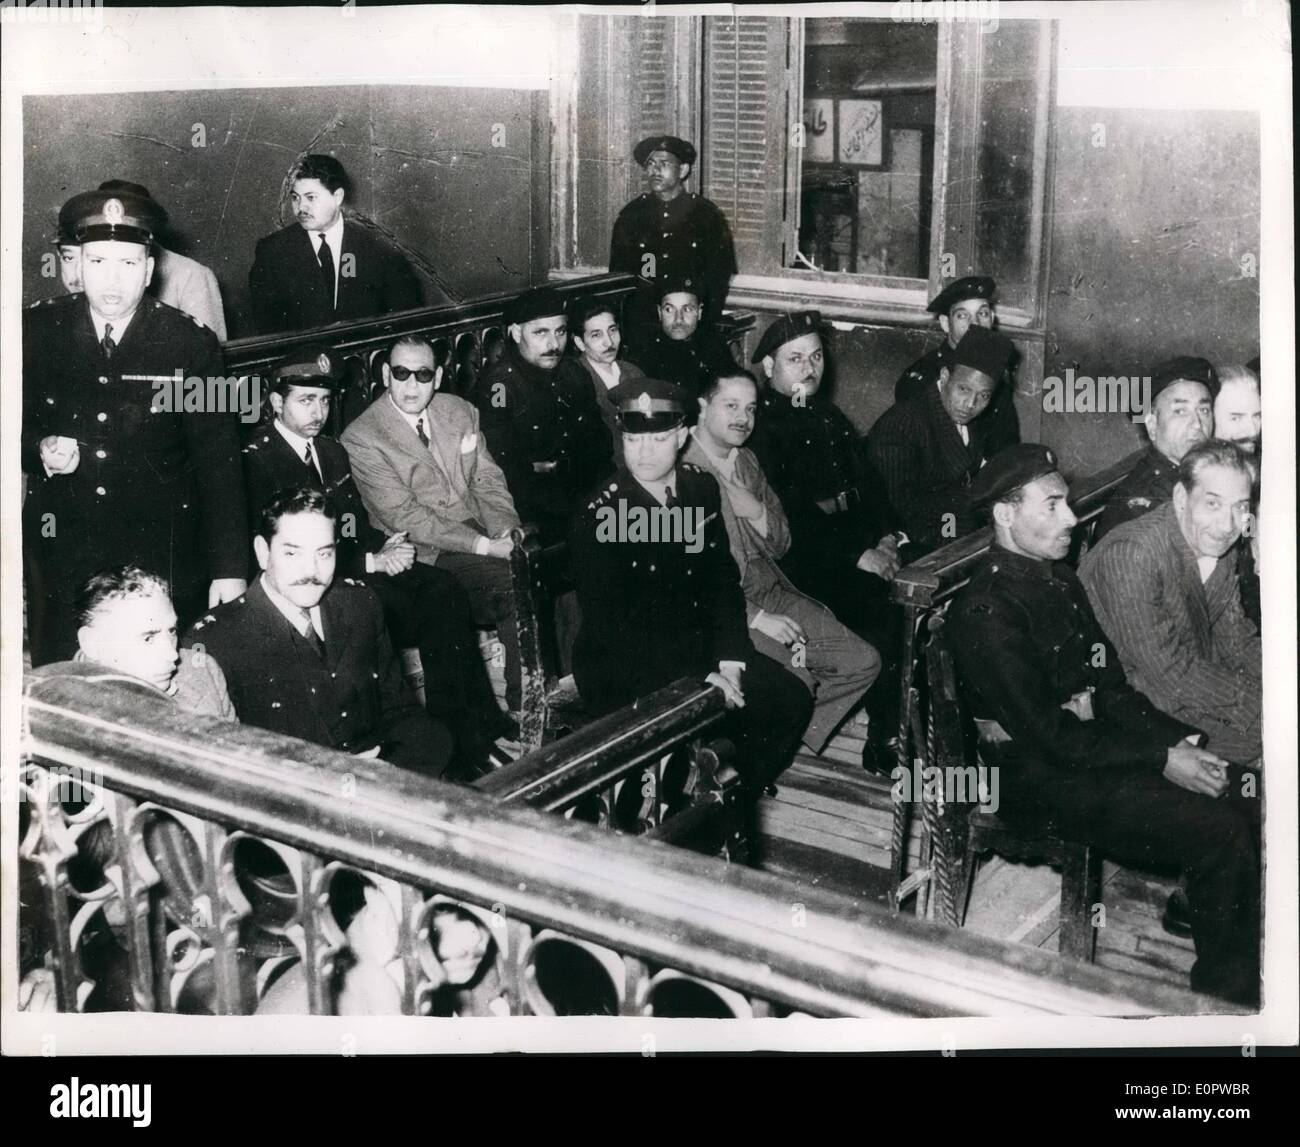 Mar. 03, 1957 - Britain In Court In Cairo - Charged With Spying: Four Britons who accused of spying appear in the Cairo Court again today.. Special precautions are being taken by the Egyptian authorities. Troops guard the door to the courtroom and the building has been searched for explosives. the Briton are James Swinburn (51) Cairo business manager; Charles Pittuck (45) of the Marconi Telegraph Company; James Zarb (37) Maltese businessman John Thornton Stanley of the Presidential Assurance Stock Photo